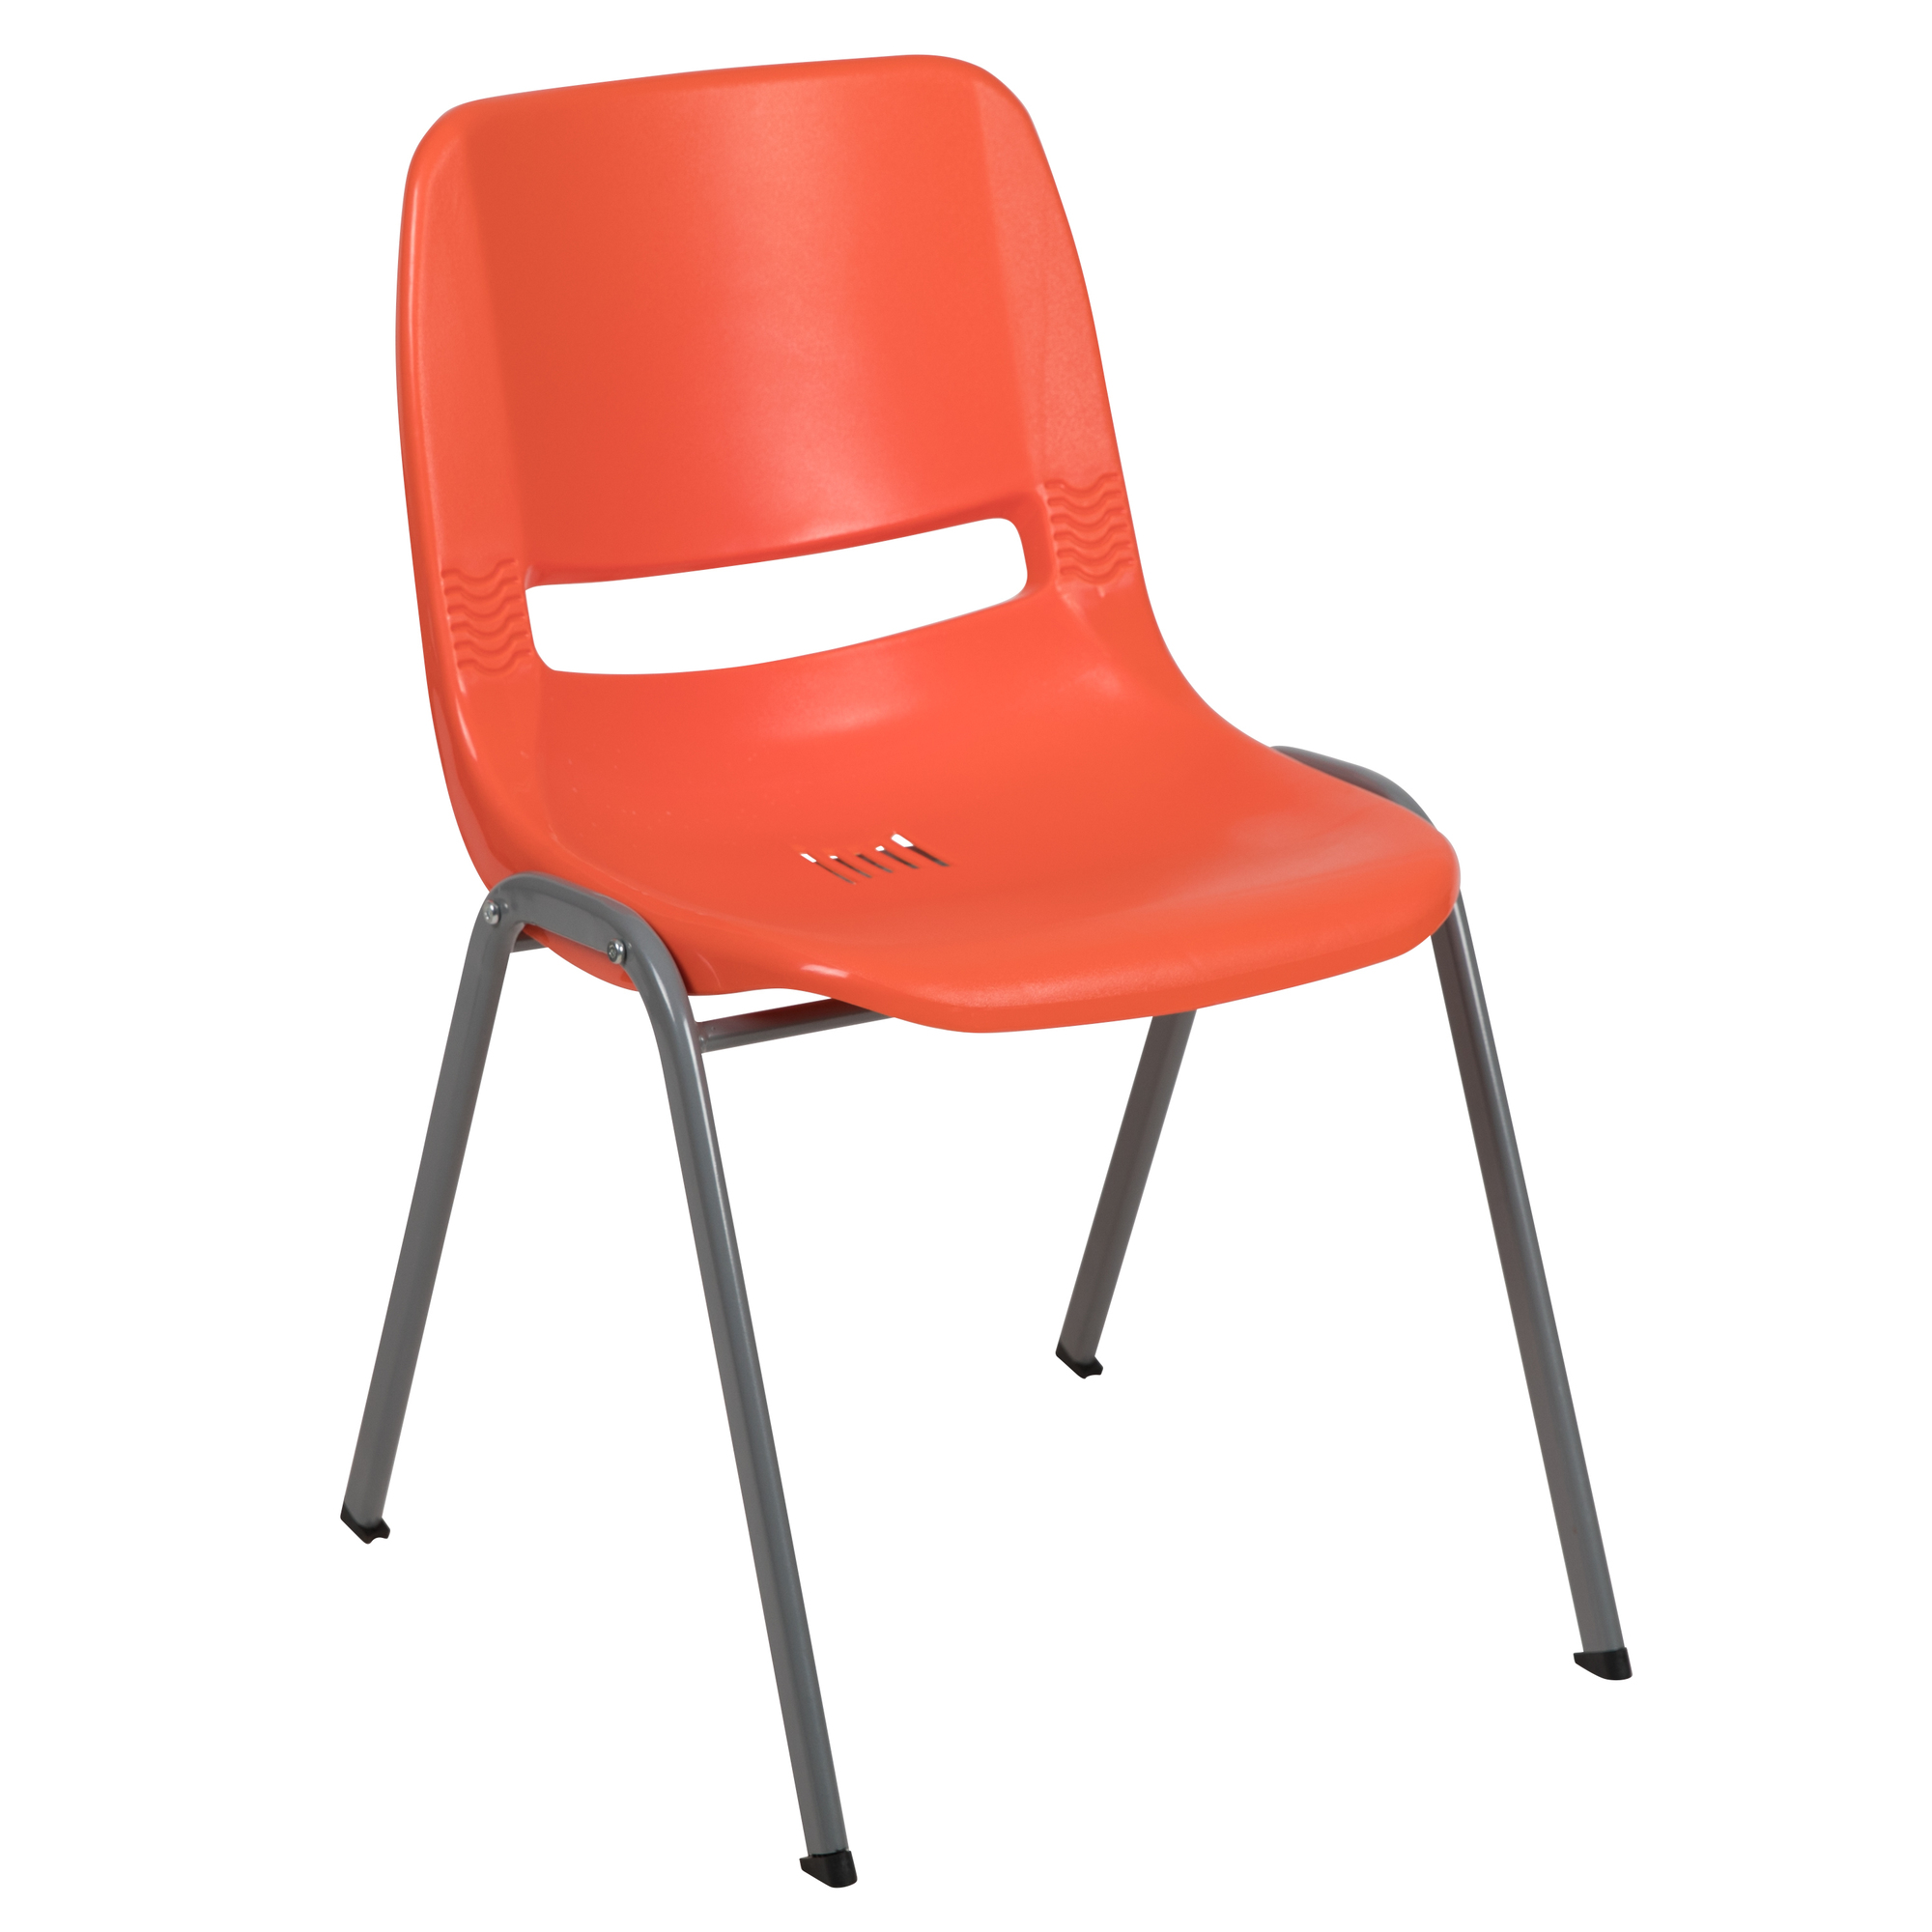 Flash Furniture, Orange Ergonomic Shell Student Stack Chair, Primary Color Orange, Included (qty.) 1, Model RUTEO1OR